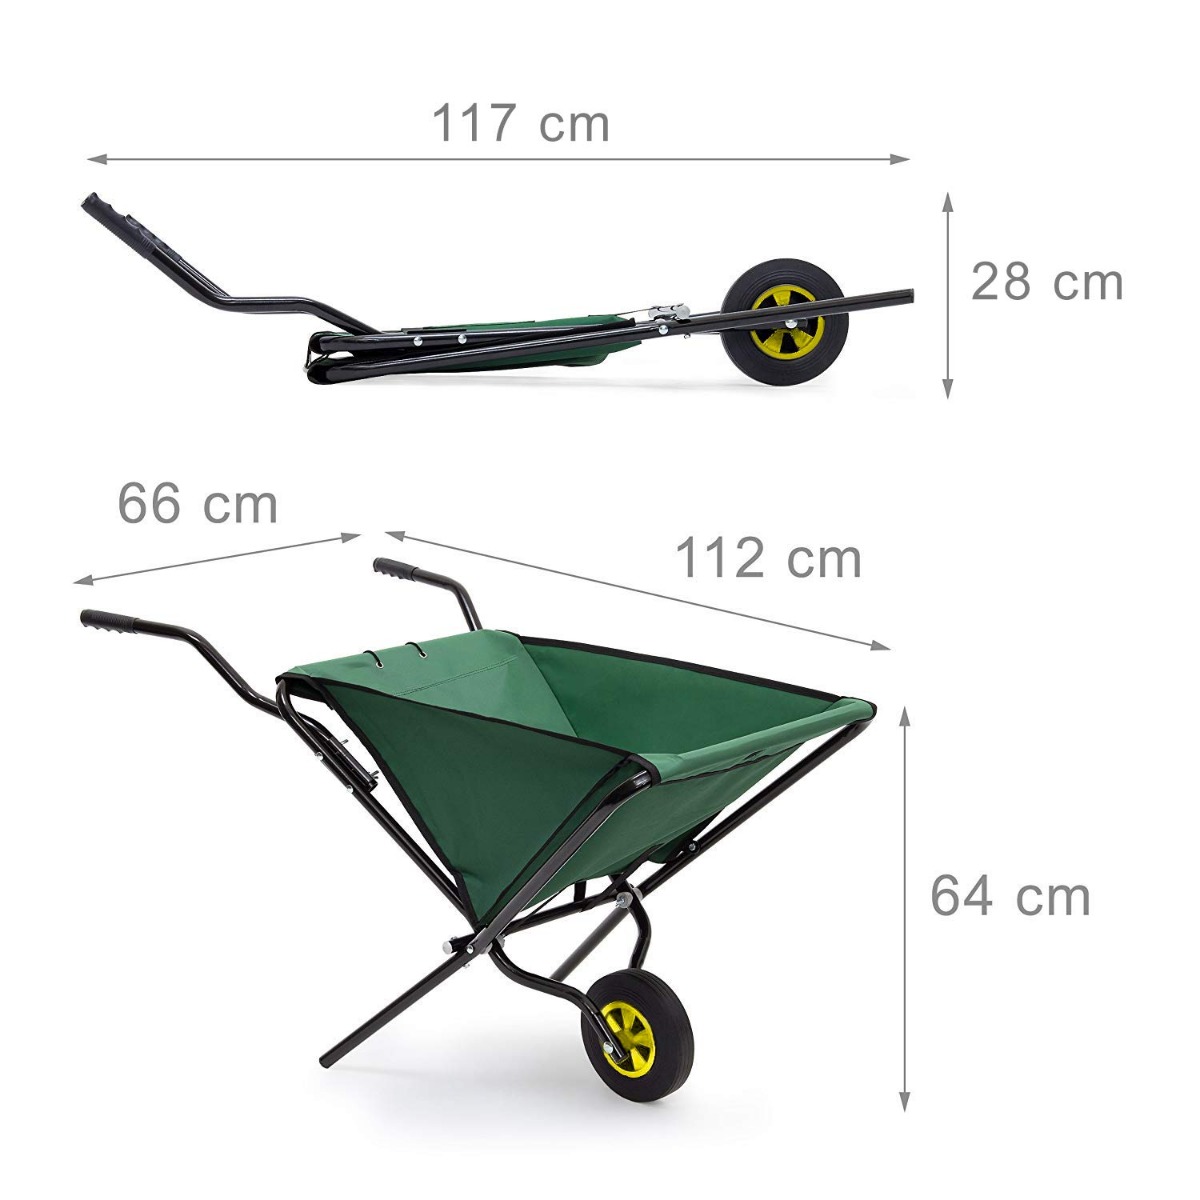 Green Foldable Wheelbarrow 66x64x112cm – 26x25x44in – Steel with Strong Polyester Space-Saving Garden Cart Gardening Wheelbarrow Holds up to 30 kg (60lbs) -7481